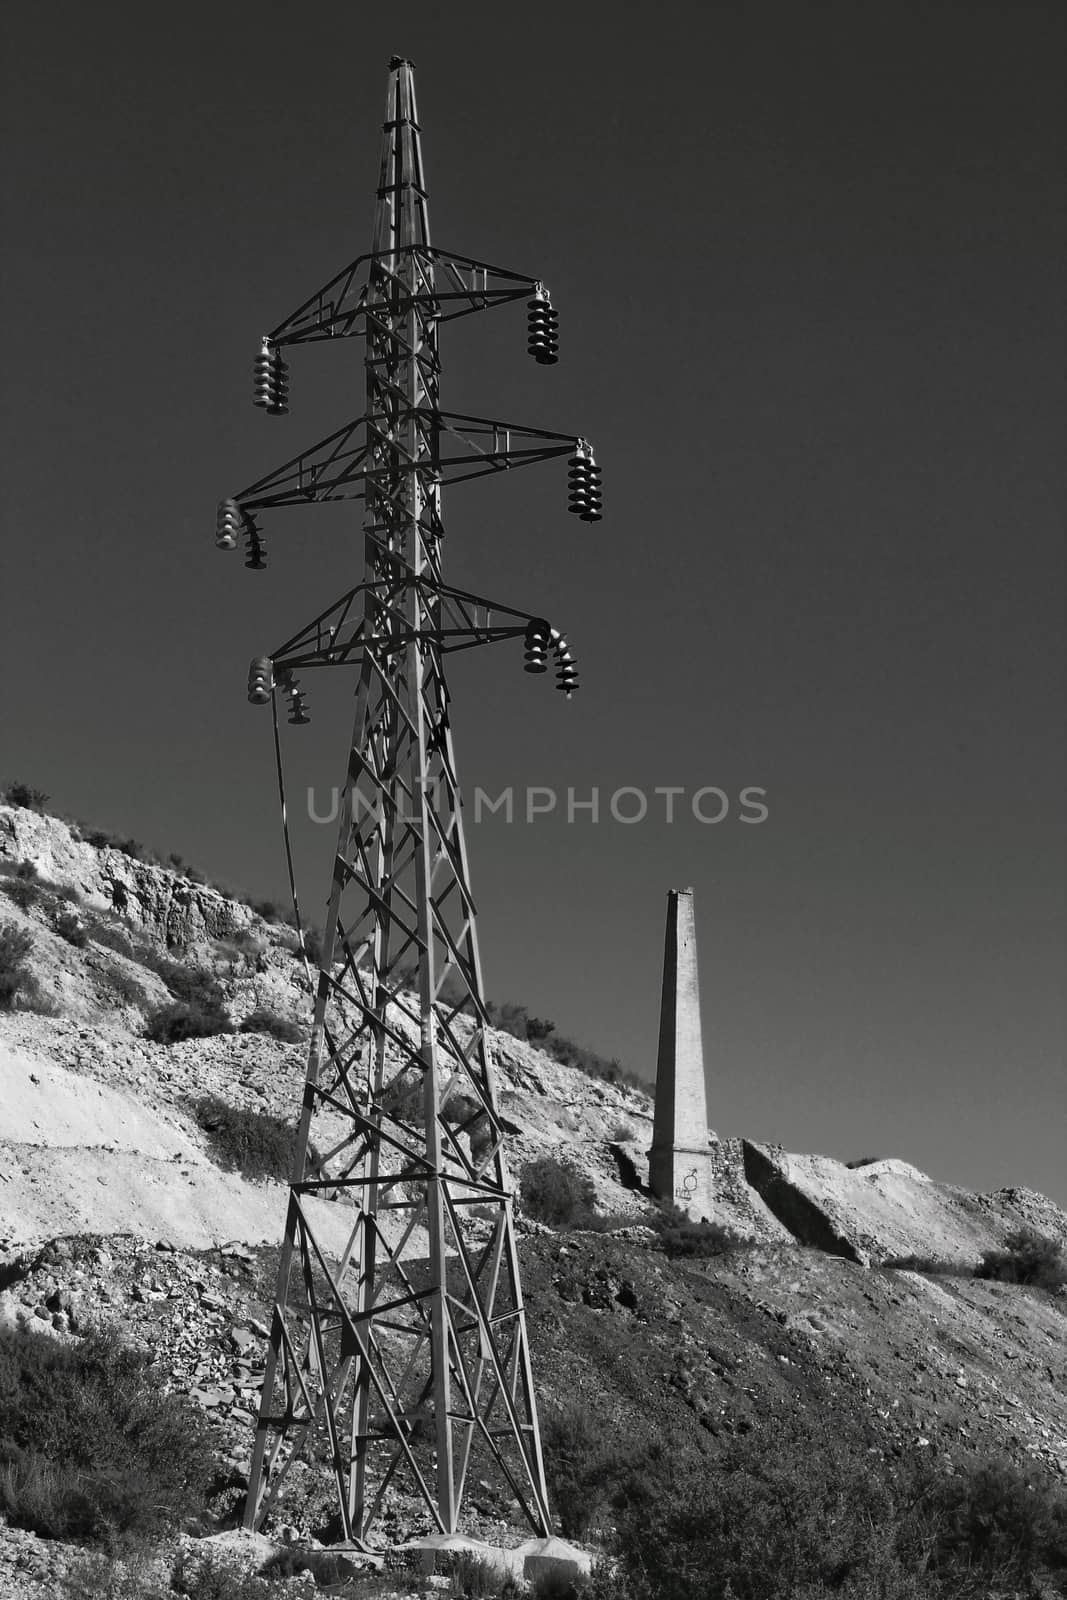 High voltage tower in an old abandoned quarry in Mazarron, Murcia, Spain